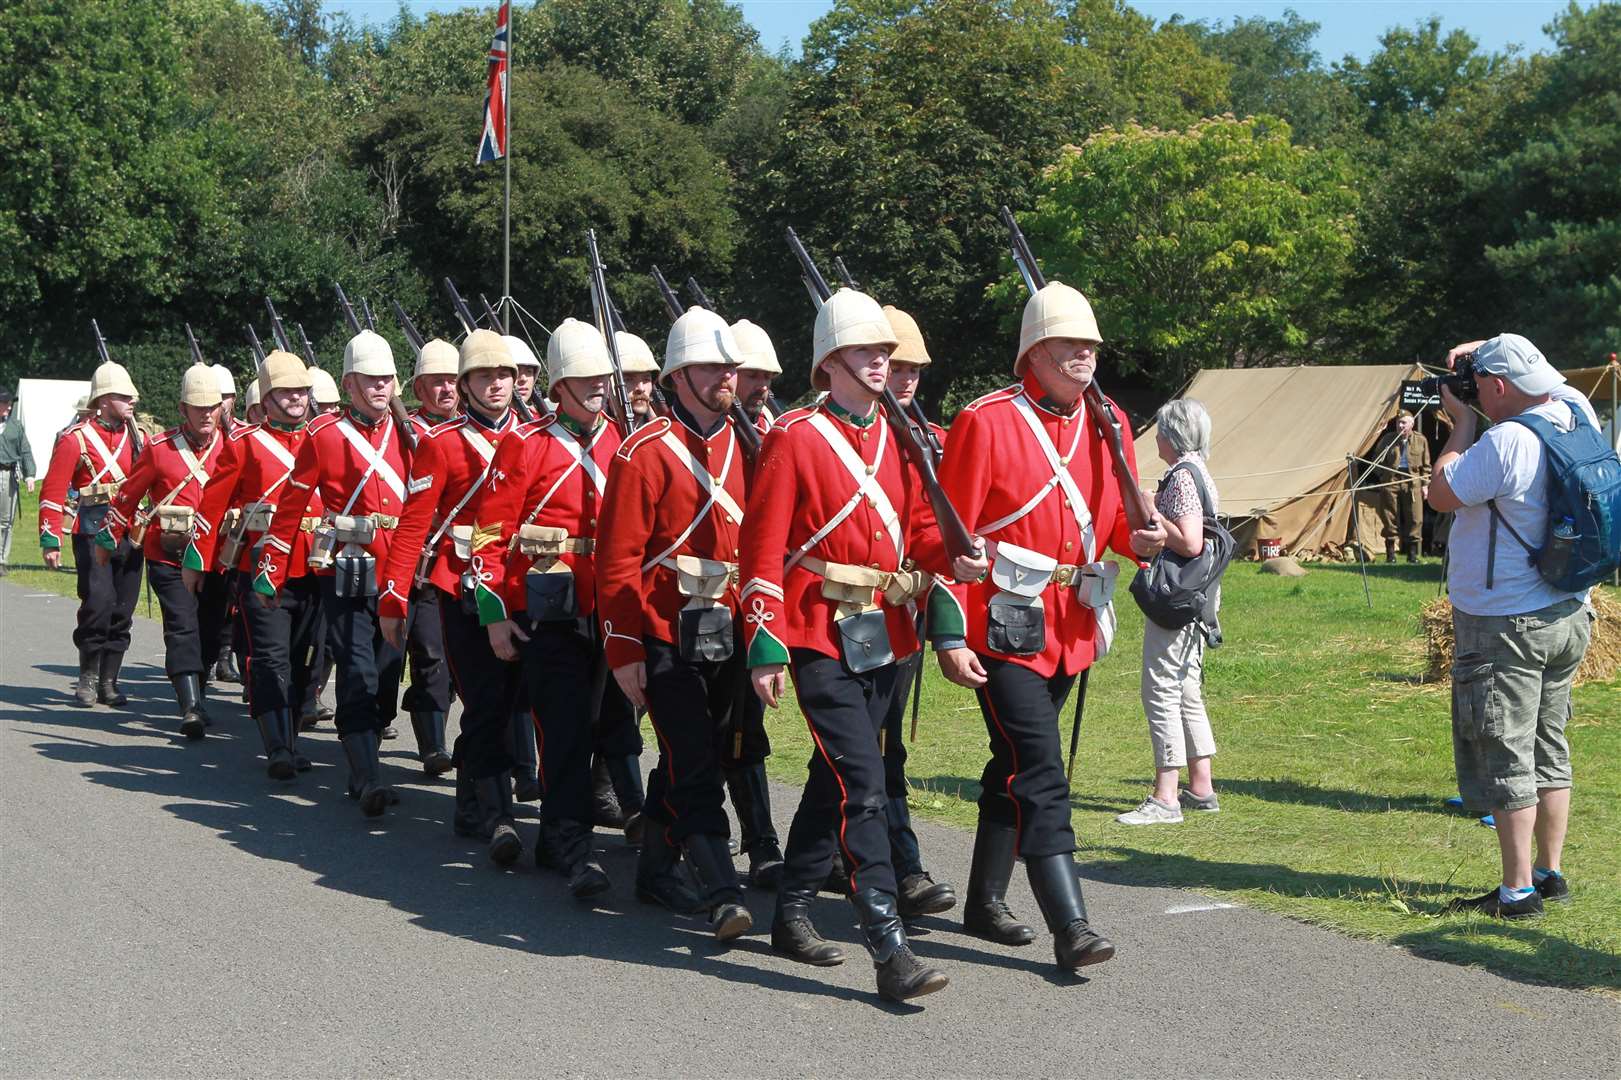 Soldiers march at a past Military Odyssey Picture: John Westhrop